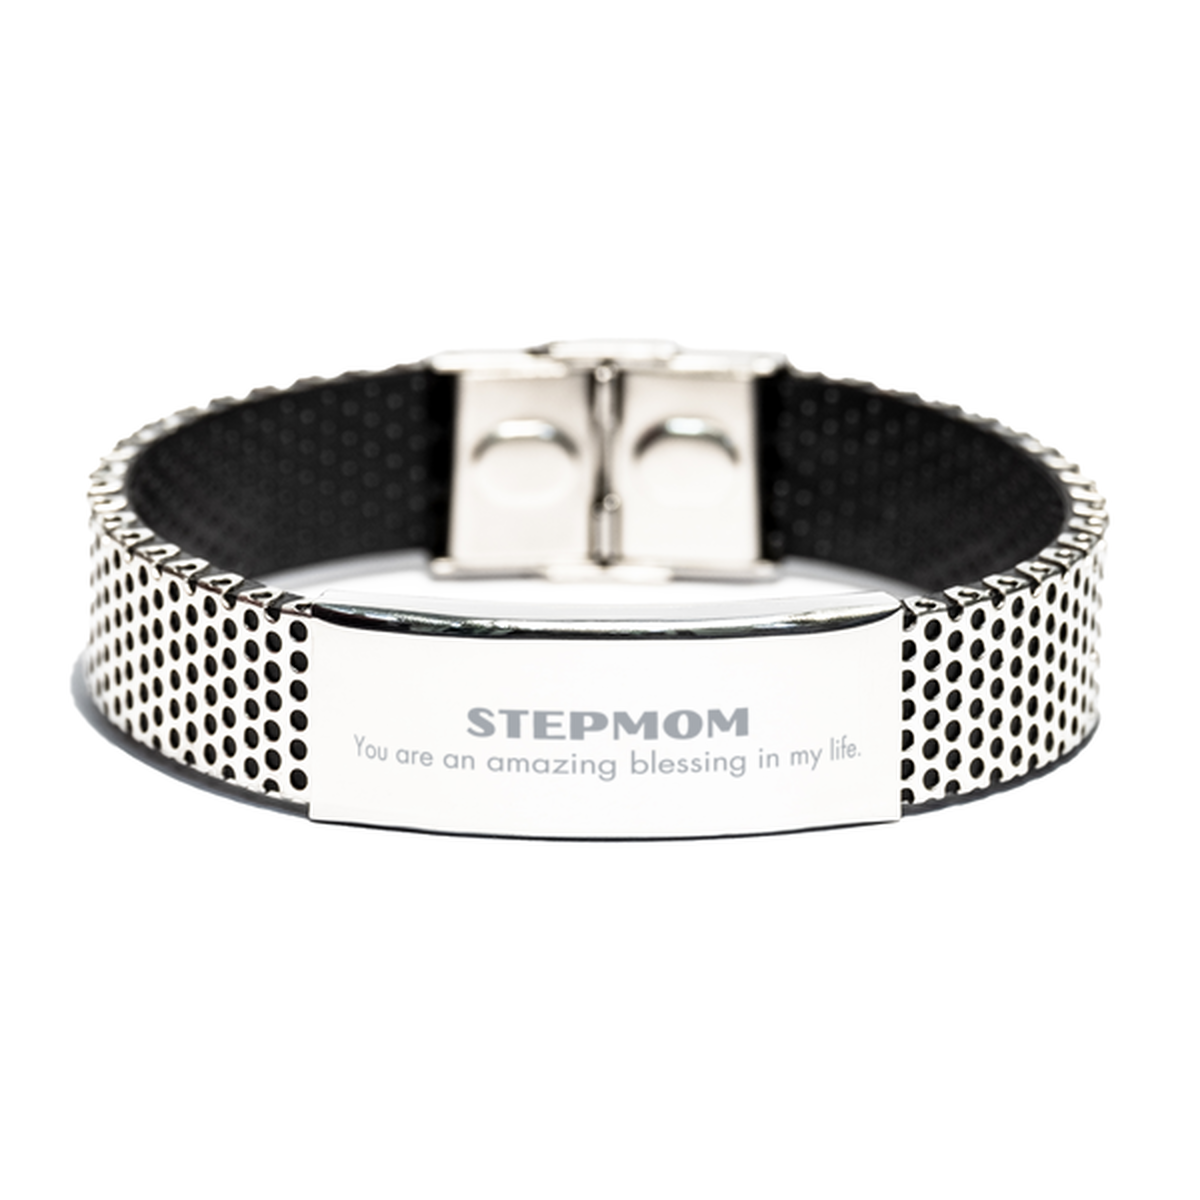 Stepmom Stainless Steel Bracelet, You are an amazing blessing in my life, Thank You Gifts For Stepmom, Inspirational Birthday Christmas Unique Gifts For Stepmom